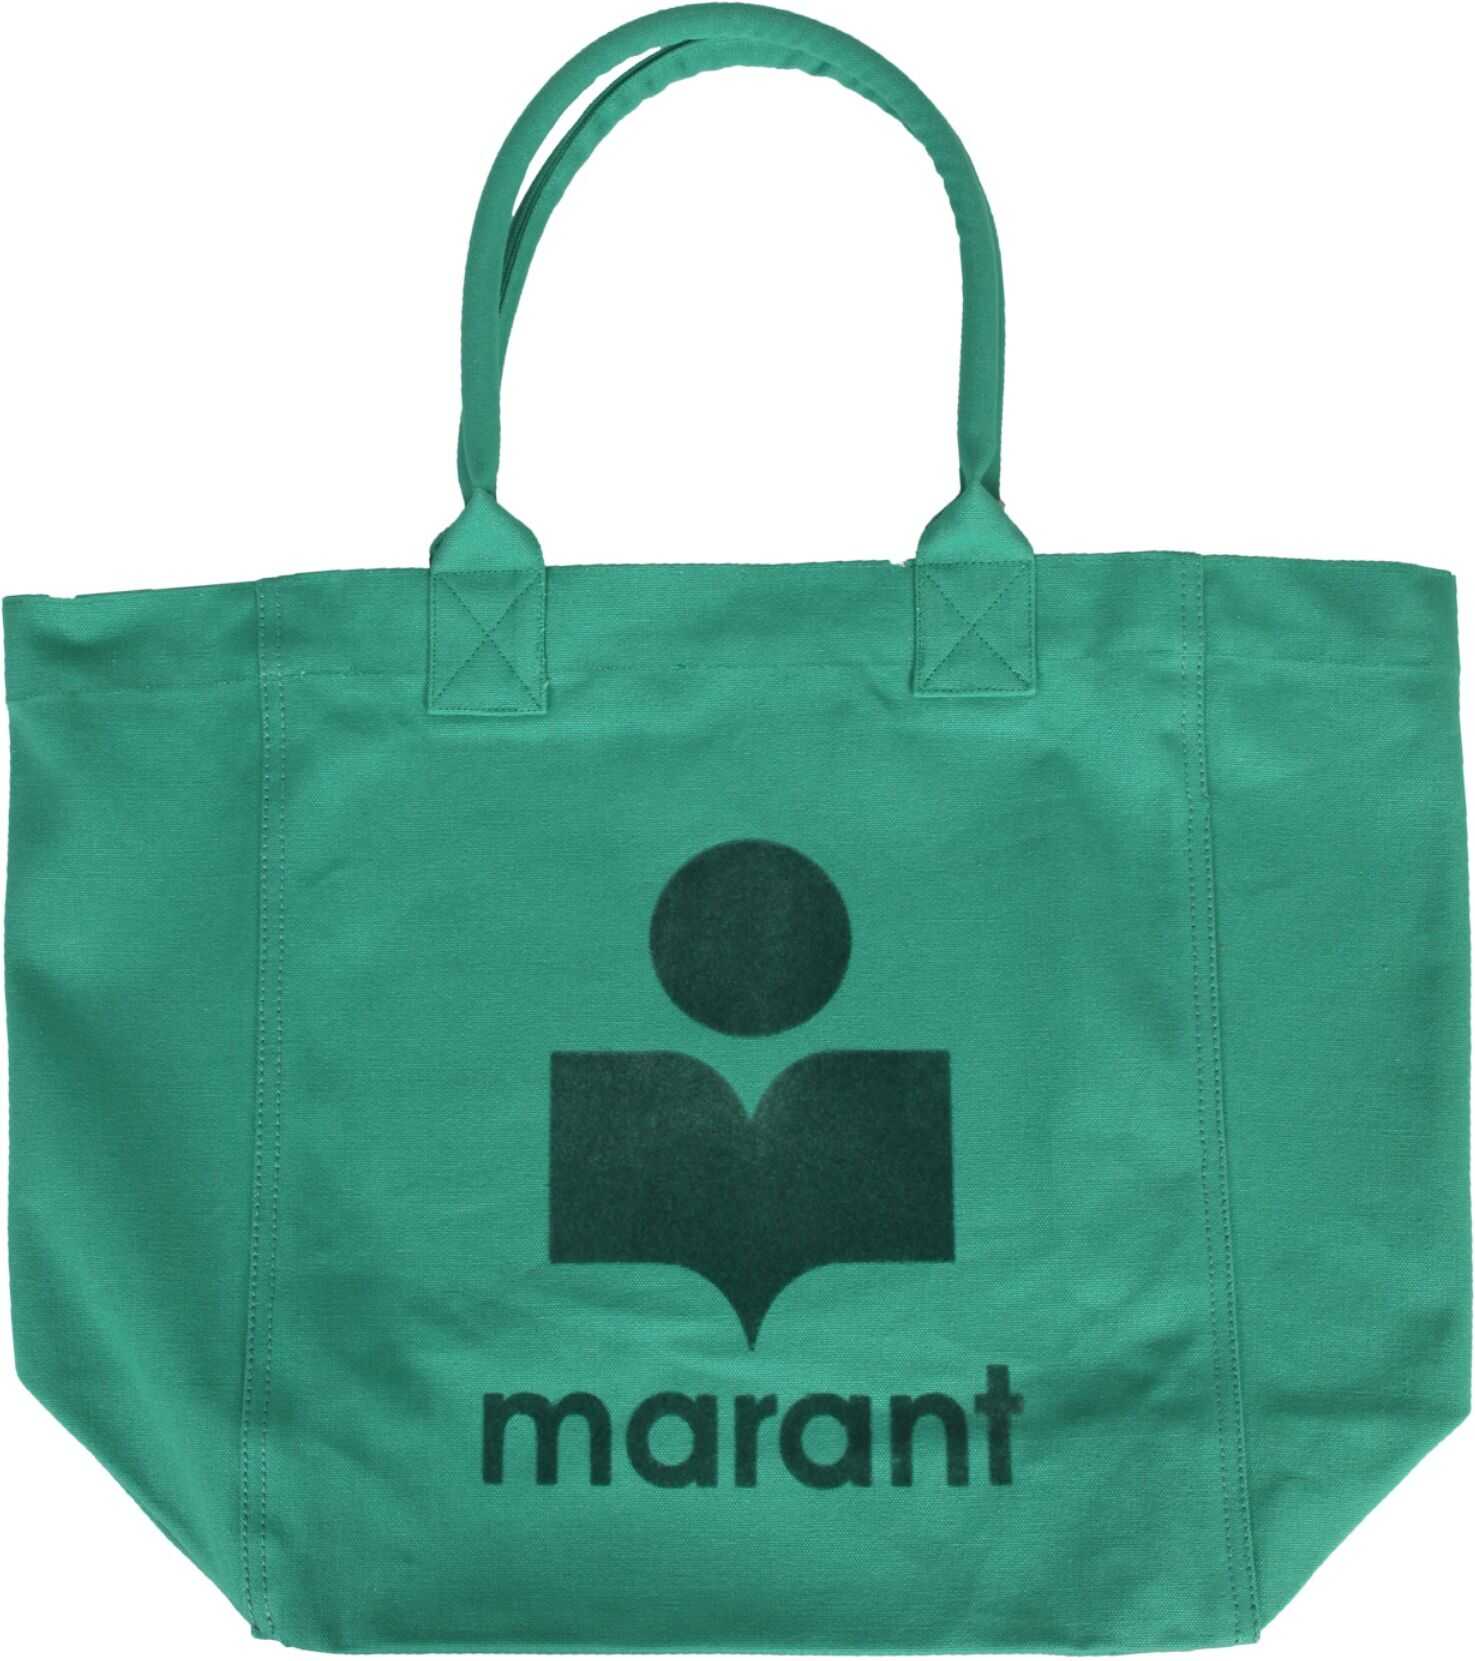 Isabel Marant Yenky Tote Bag PM0020_21A053M60GR GREEN